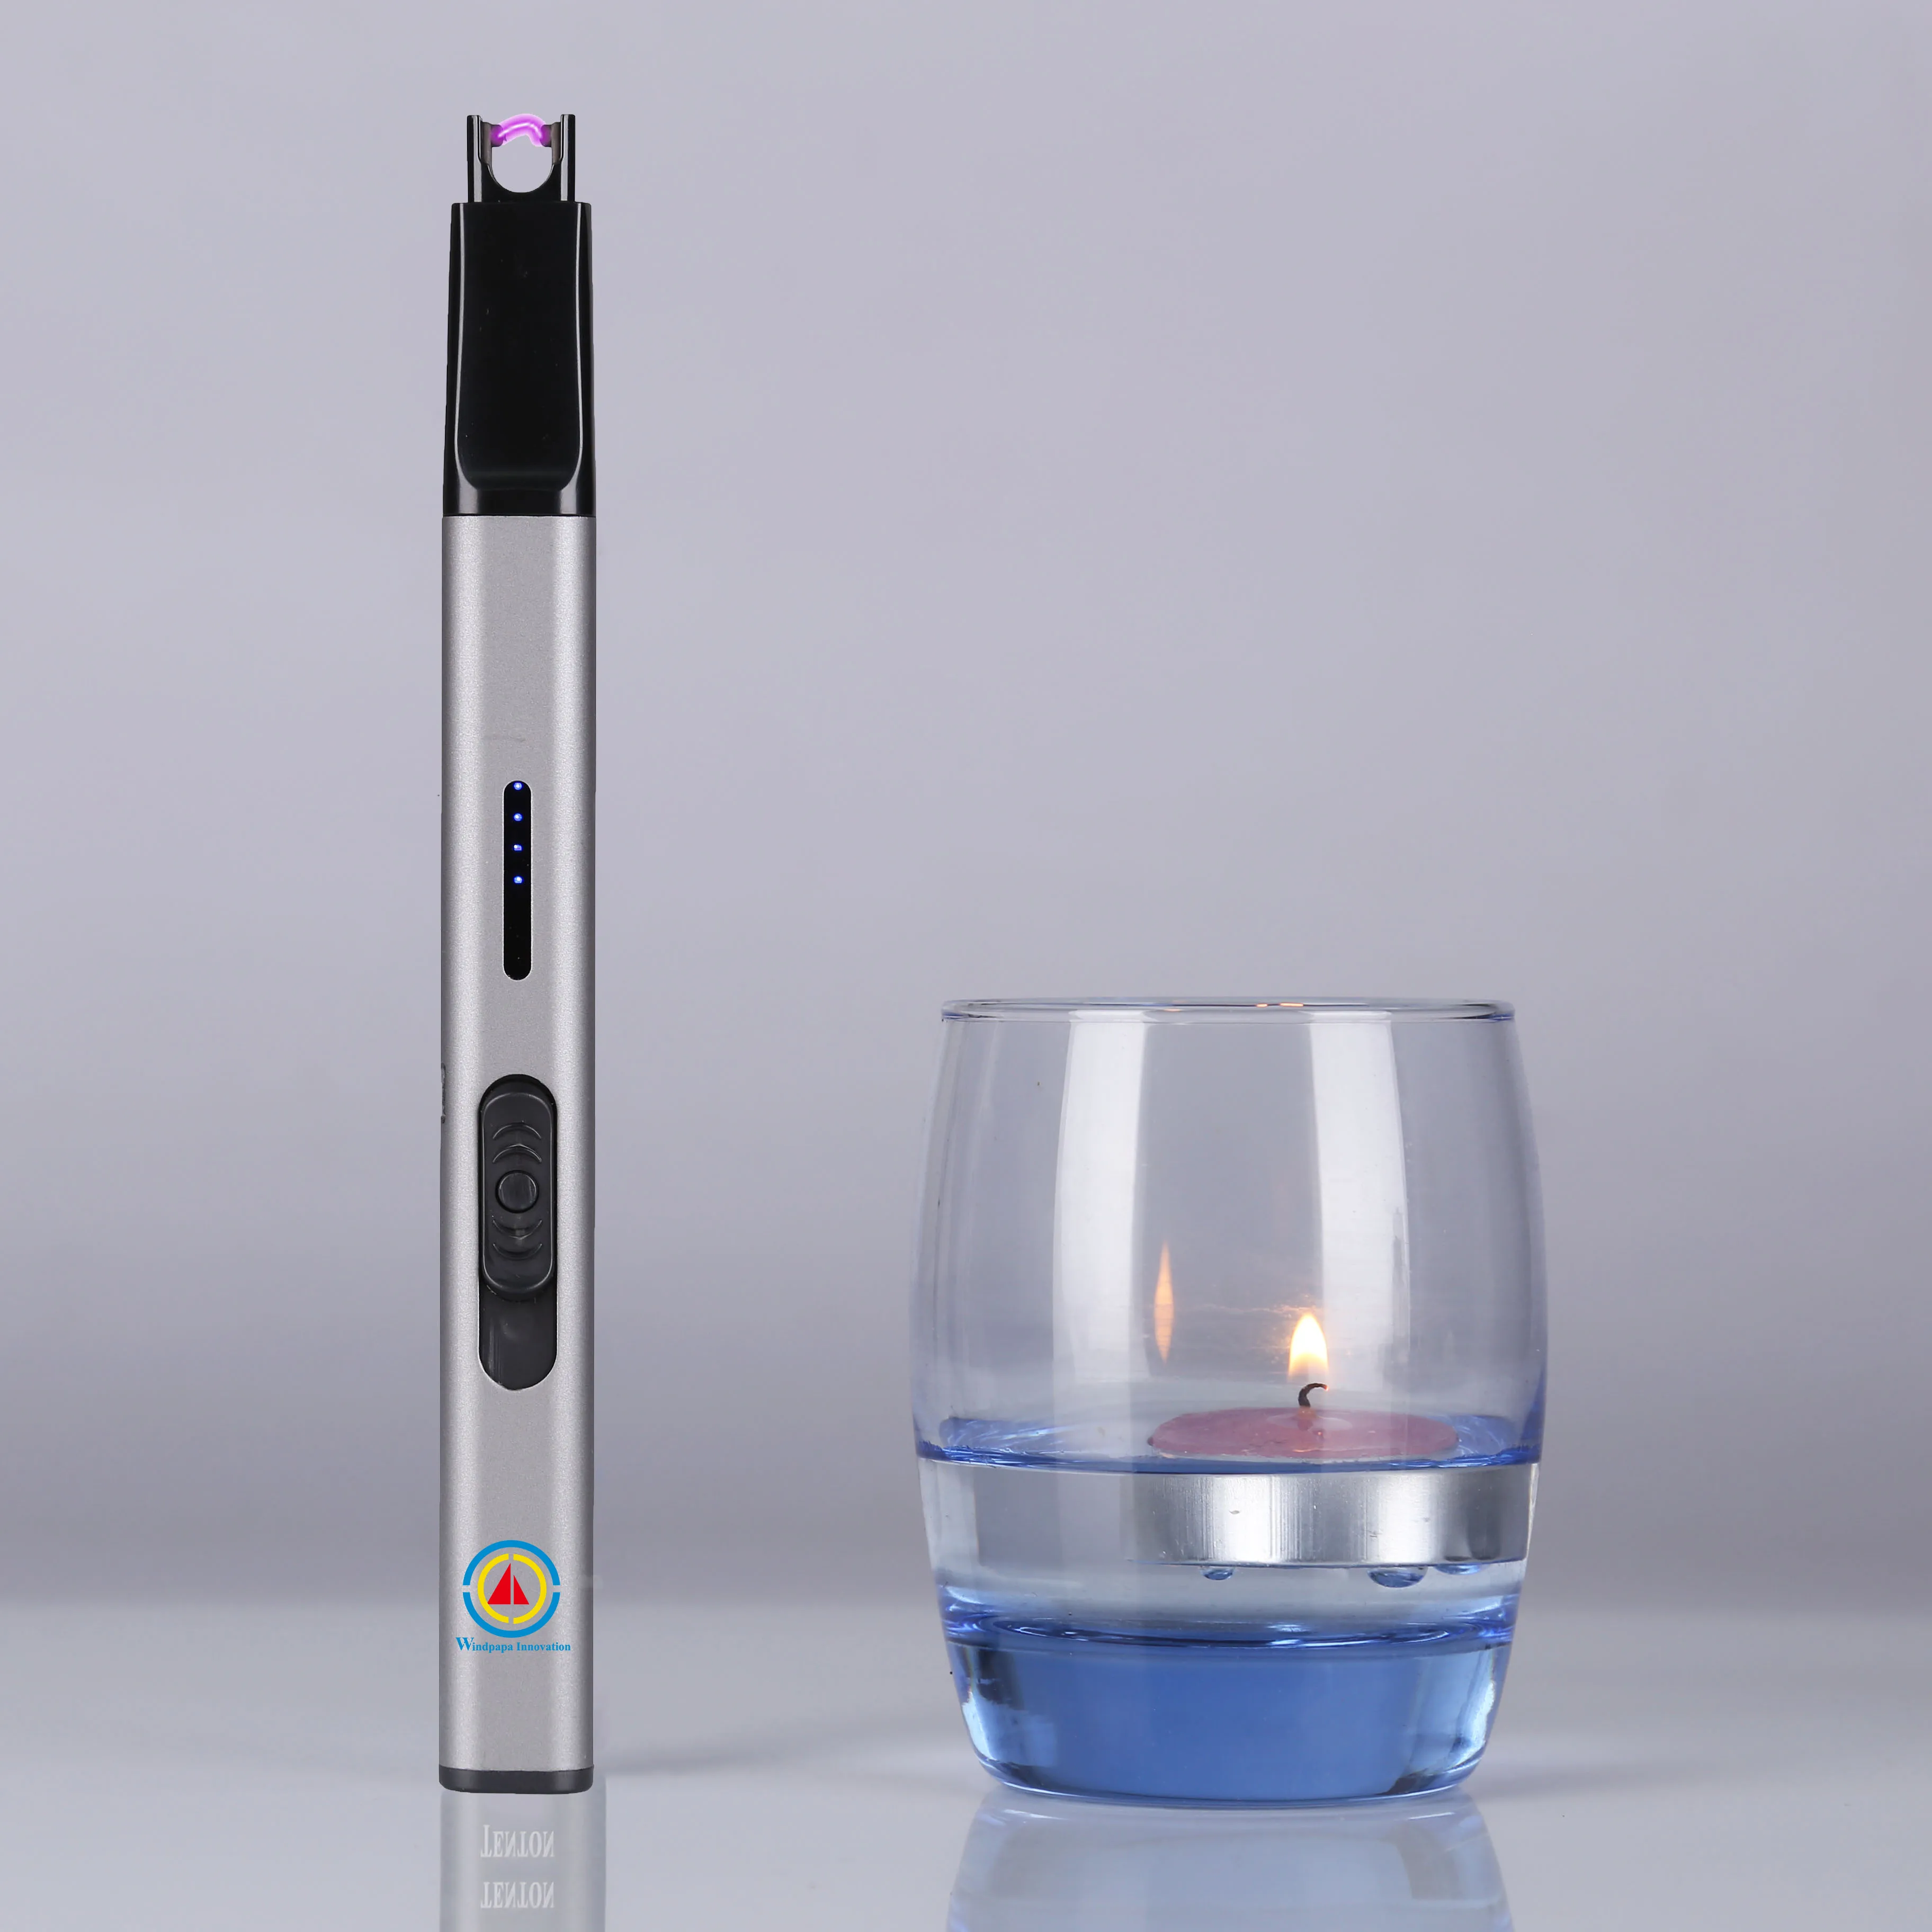 

BBQ/Candle/Kitchen Electronic_lighters Arc with Upgrade Battery Indicator Triple Windproof Portable Plasma USB Electric Lighter, Grey, silivey, blue, welcome custom